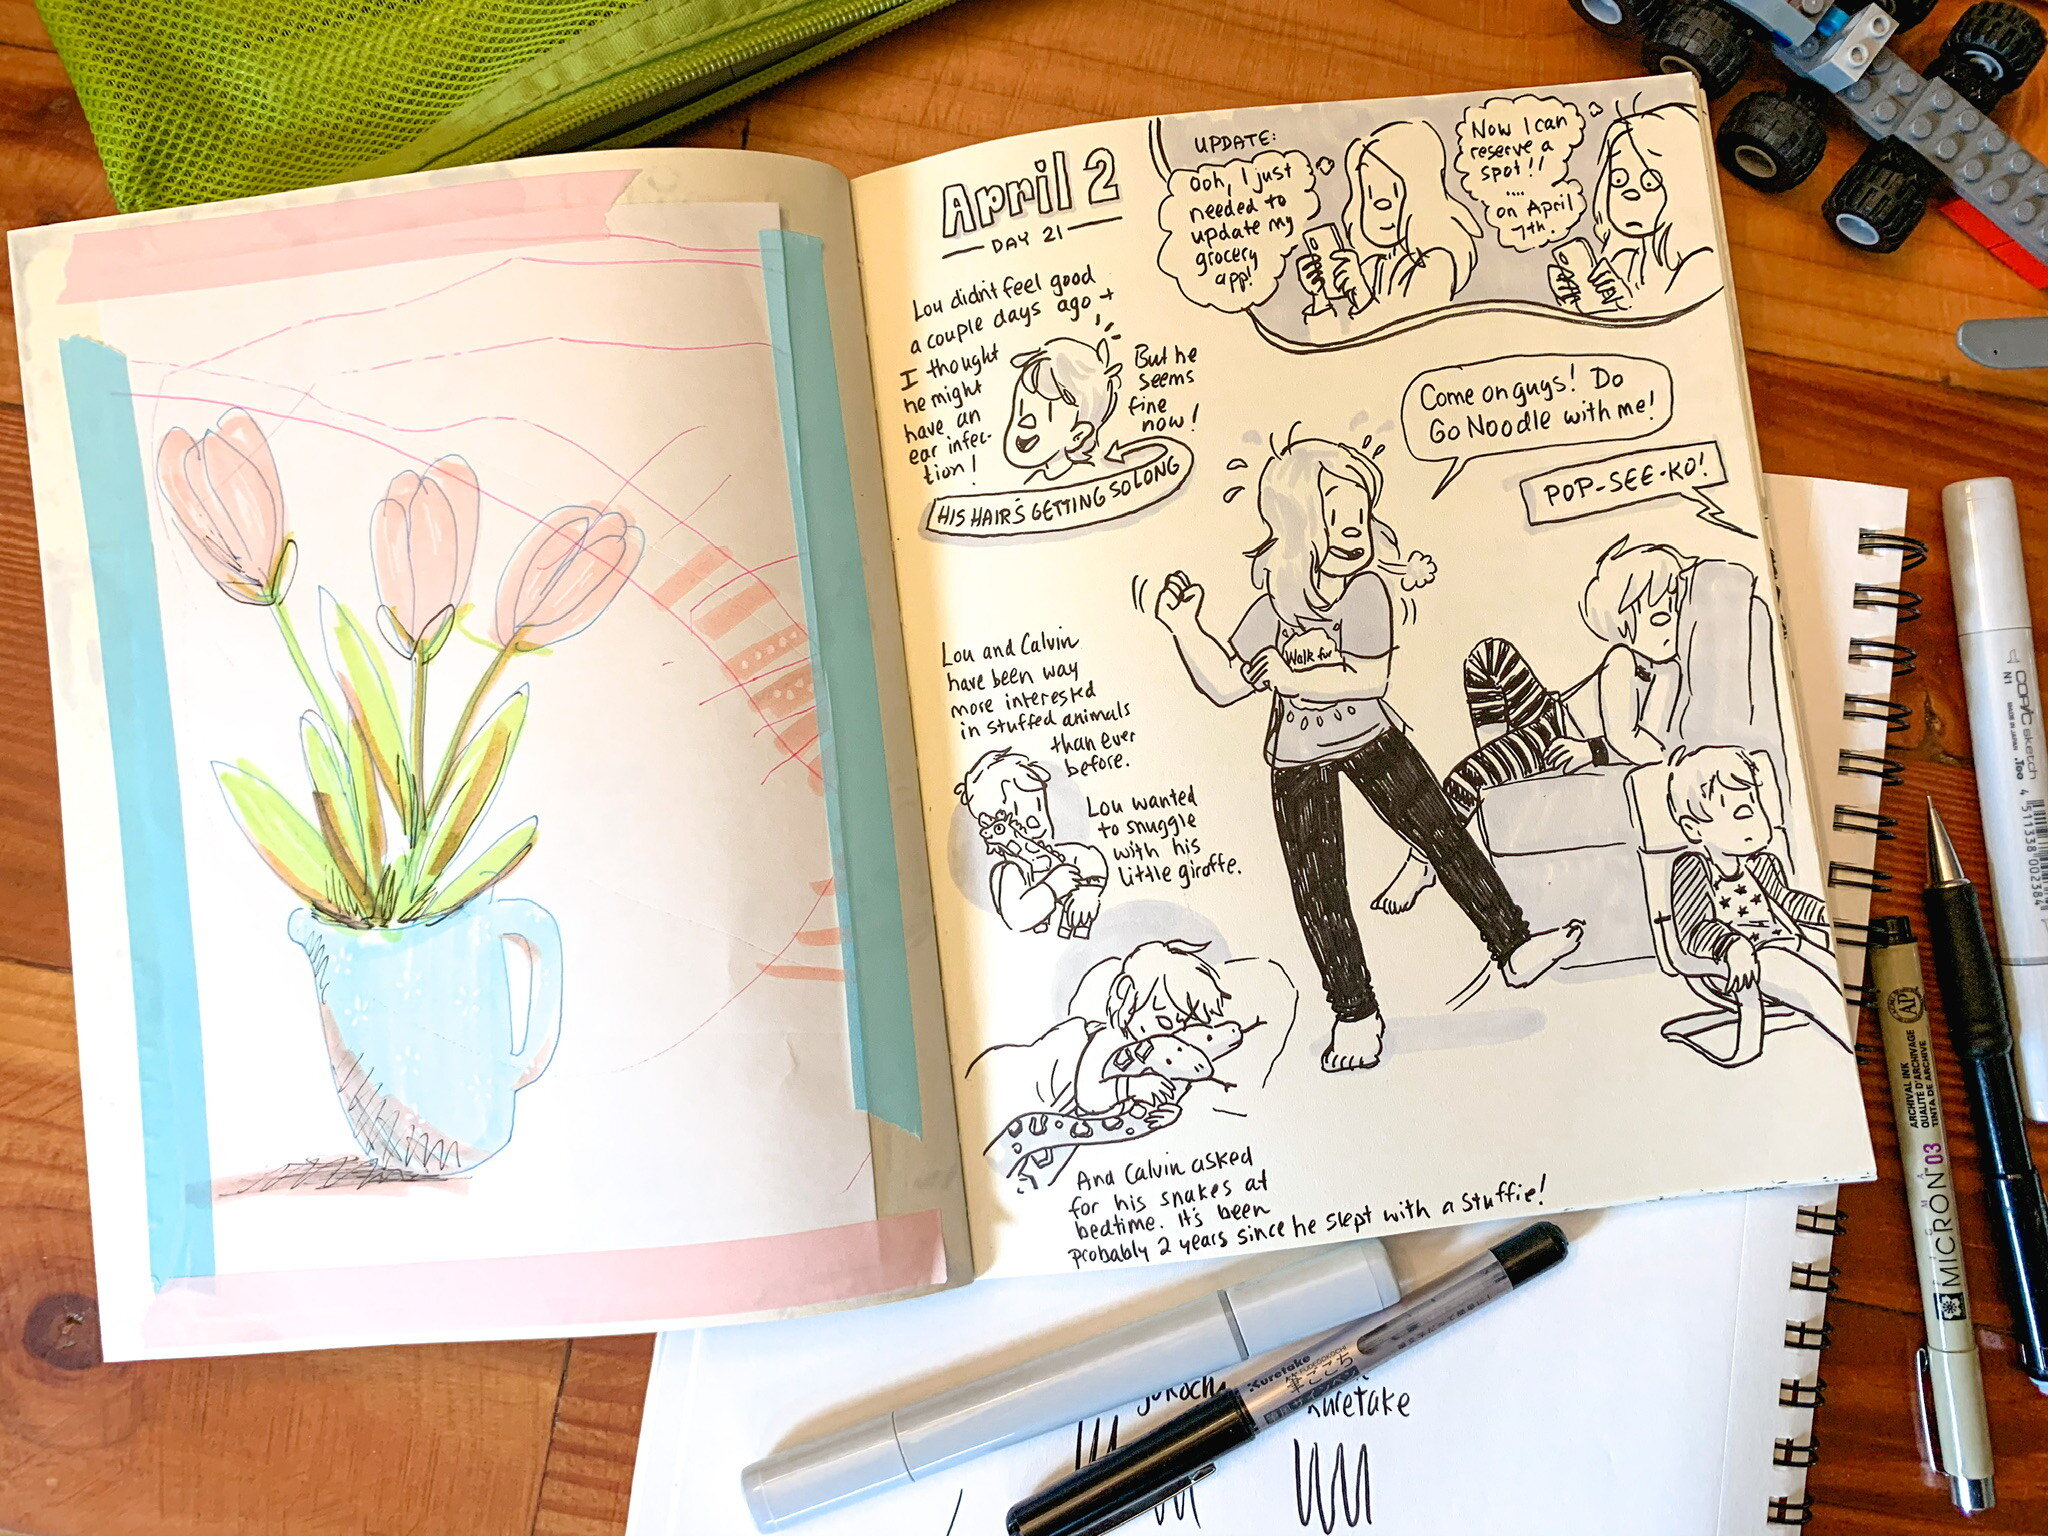 New Kid Sketchbook: A Place for Your Cartoons, Doodles, and Stories [Book]